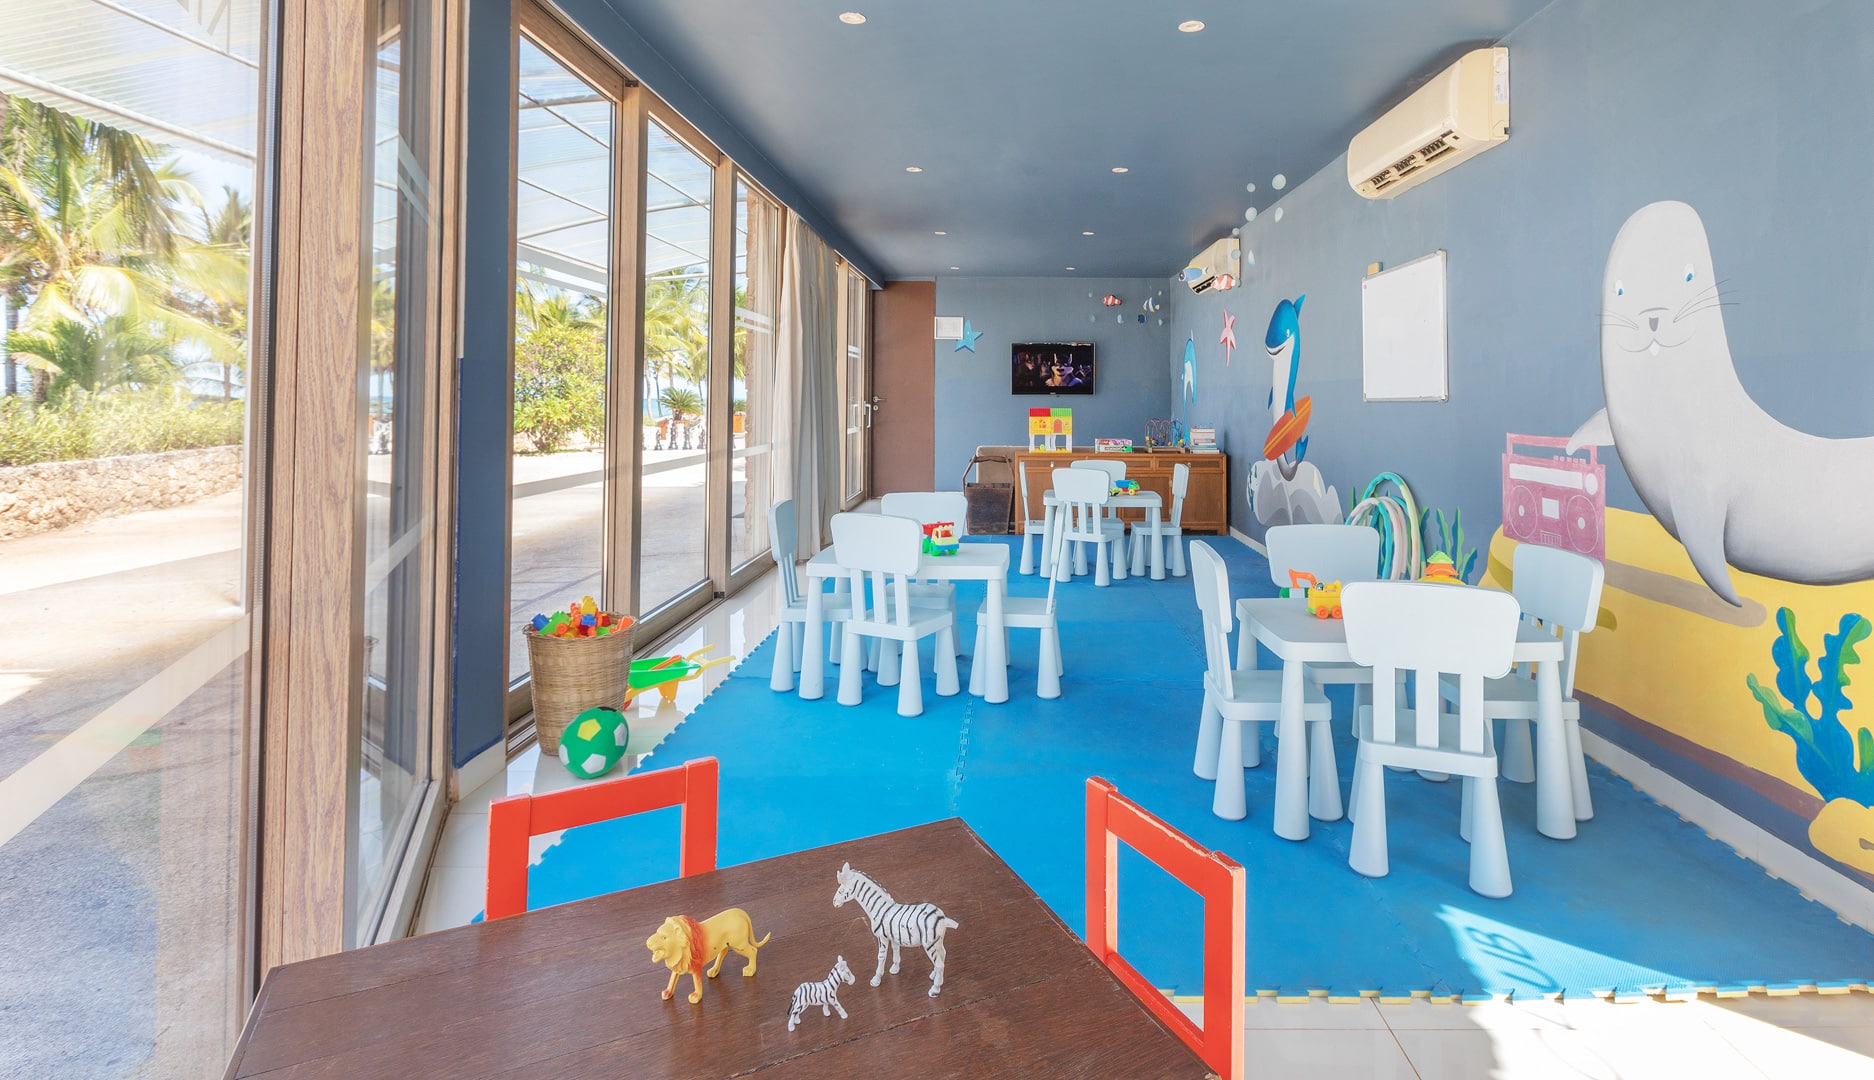 The vibrant, activity-filled Kids Club at Melia – one of the top rated Zanzibar resorts with Kids Clubs.